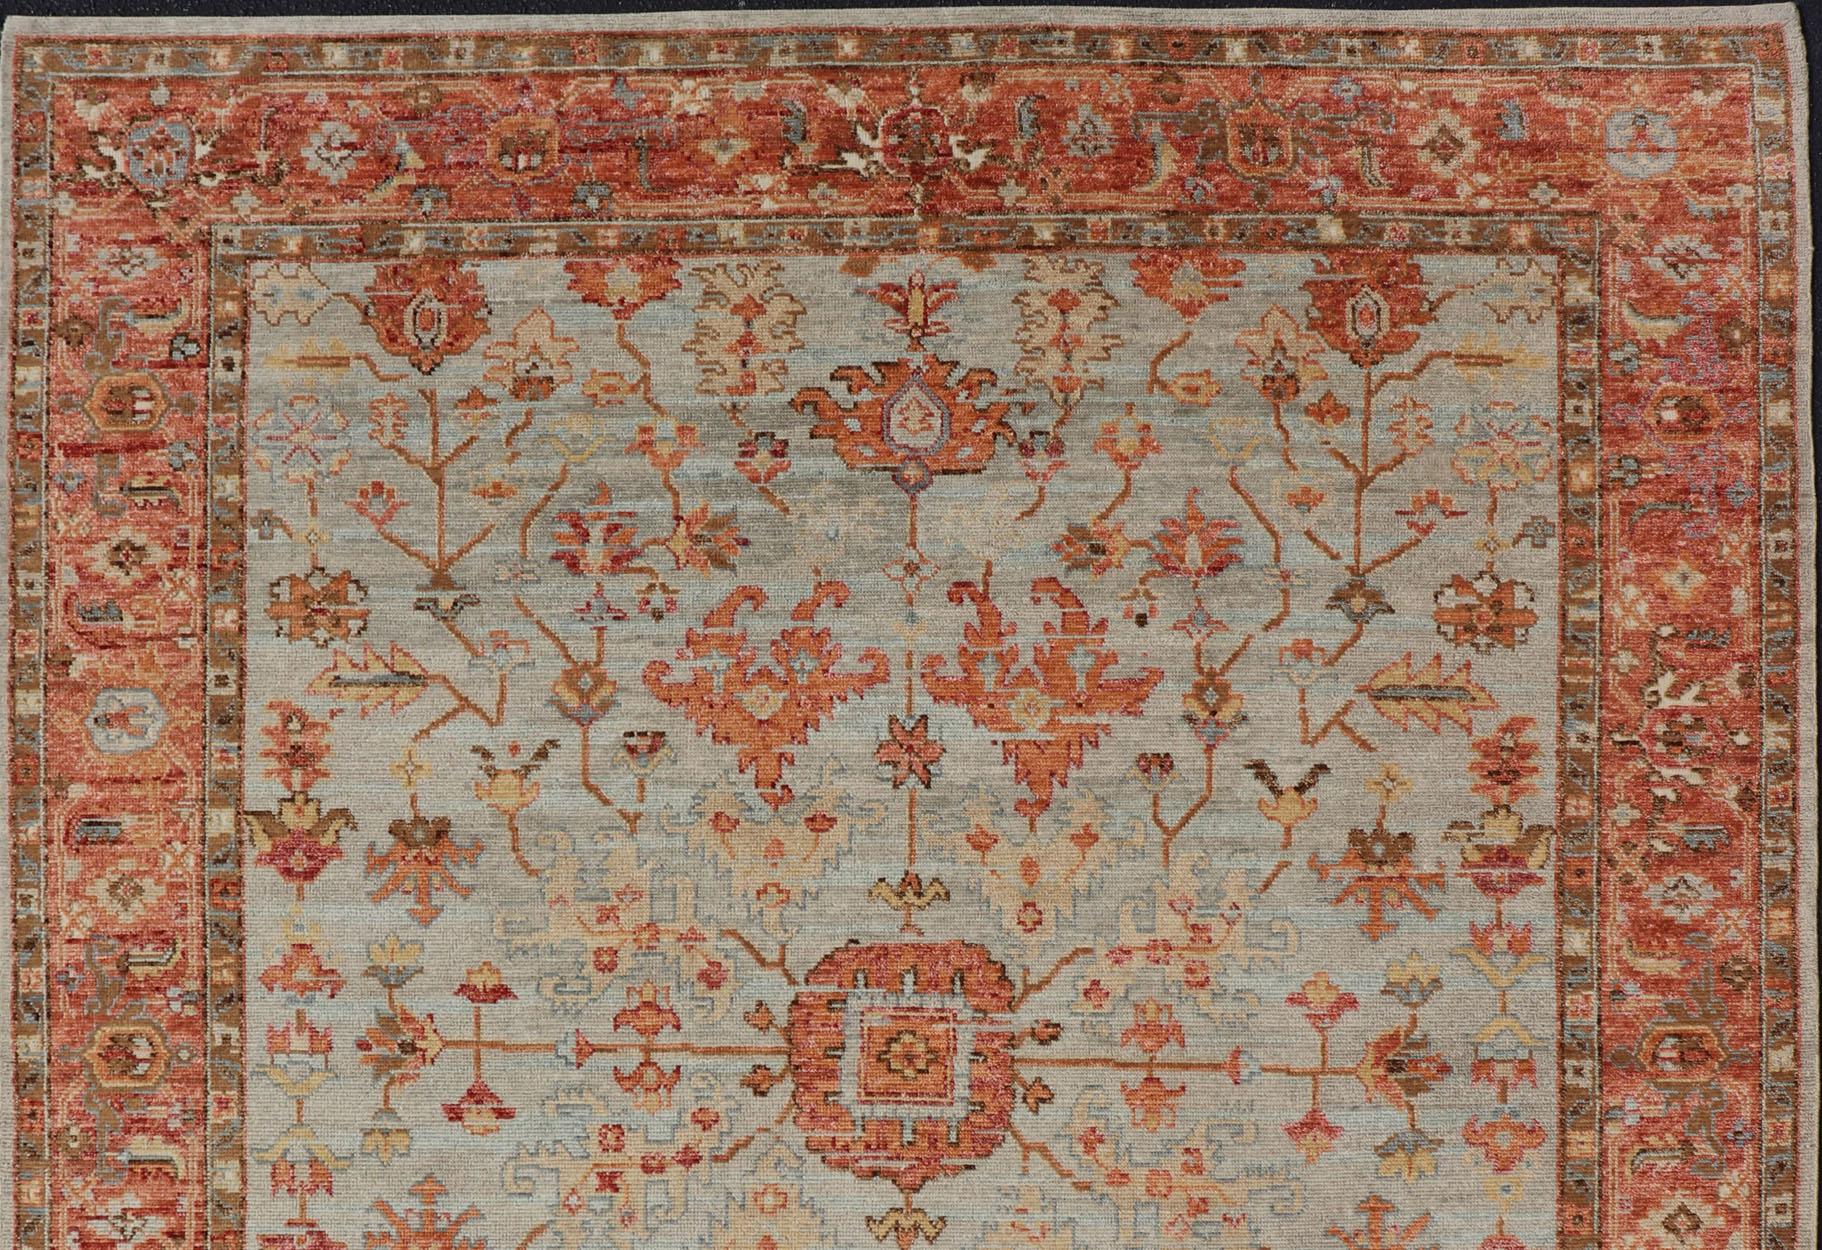 Measures 8'0 x 9'10 

This modern Indian Oushak was hand-knotted during the 2020's. The cool blue-gray field is heavily decorated in floral and leaflet motifs, commonly seen with Oushak carpets. The design is rendered in a fiery burnt orange with